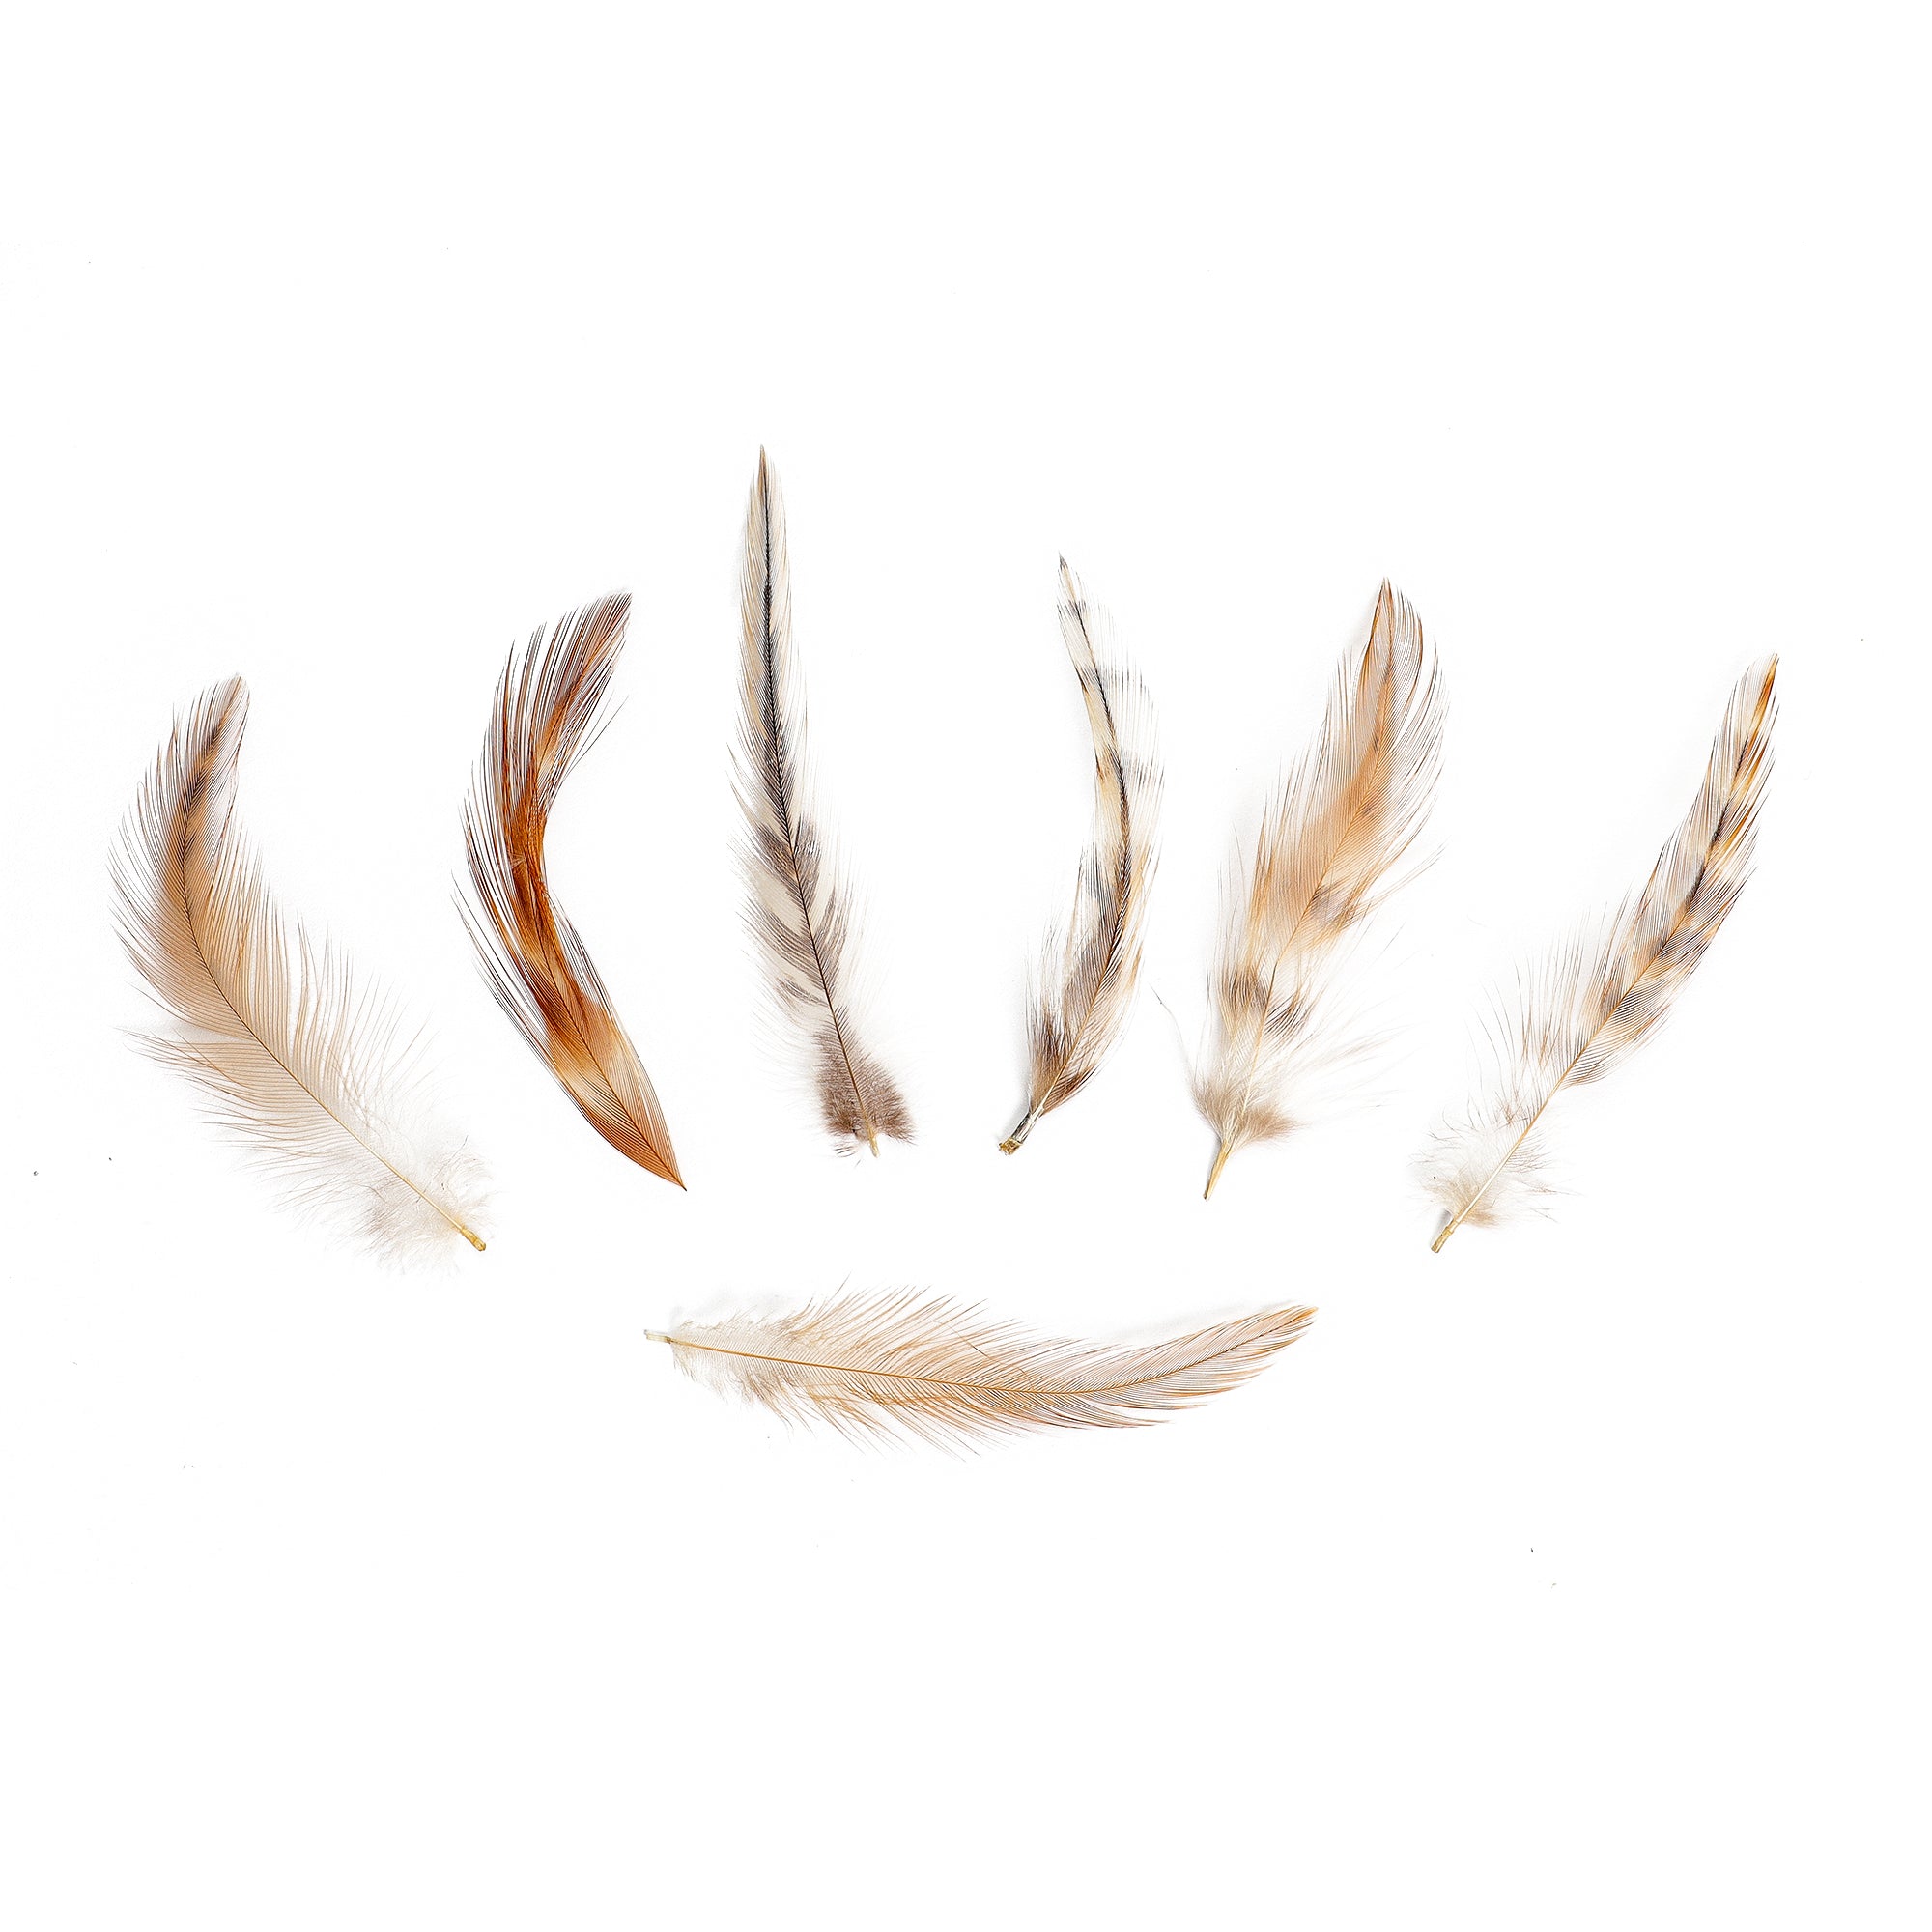 Rooster Feathers, 4 Inch Strip Furnace Red Strung Rooster Neck Hackle  Feathers Craft Supplier : 3905 